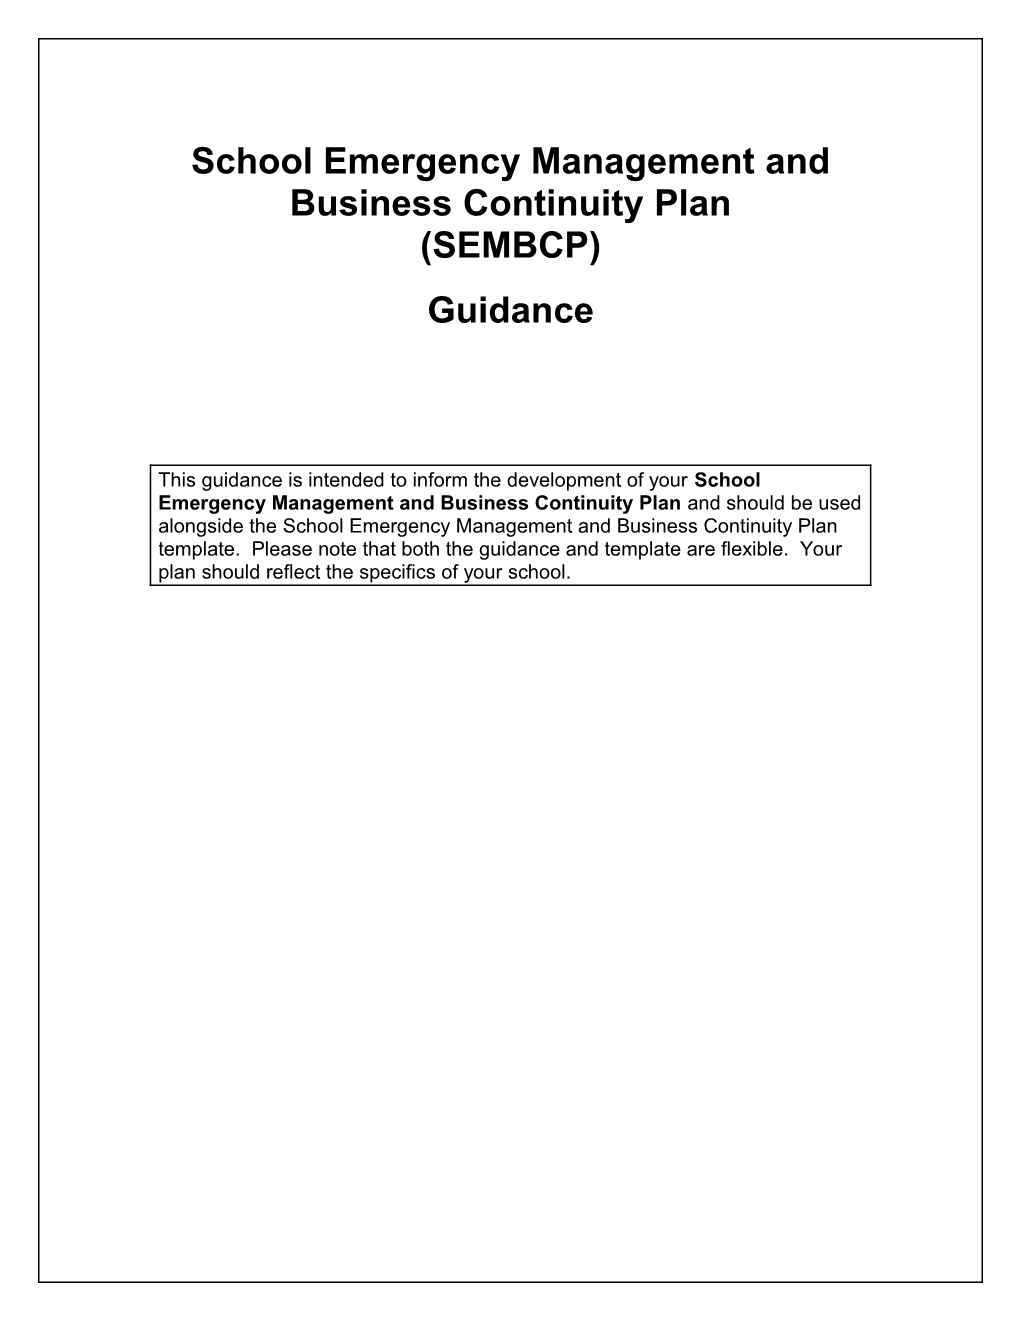 School Emergency Management and Business Continuity Plan